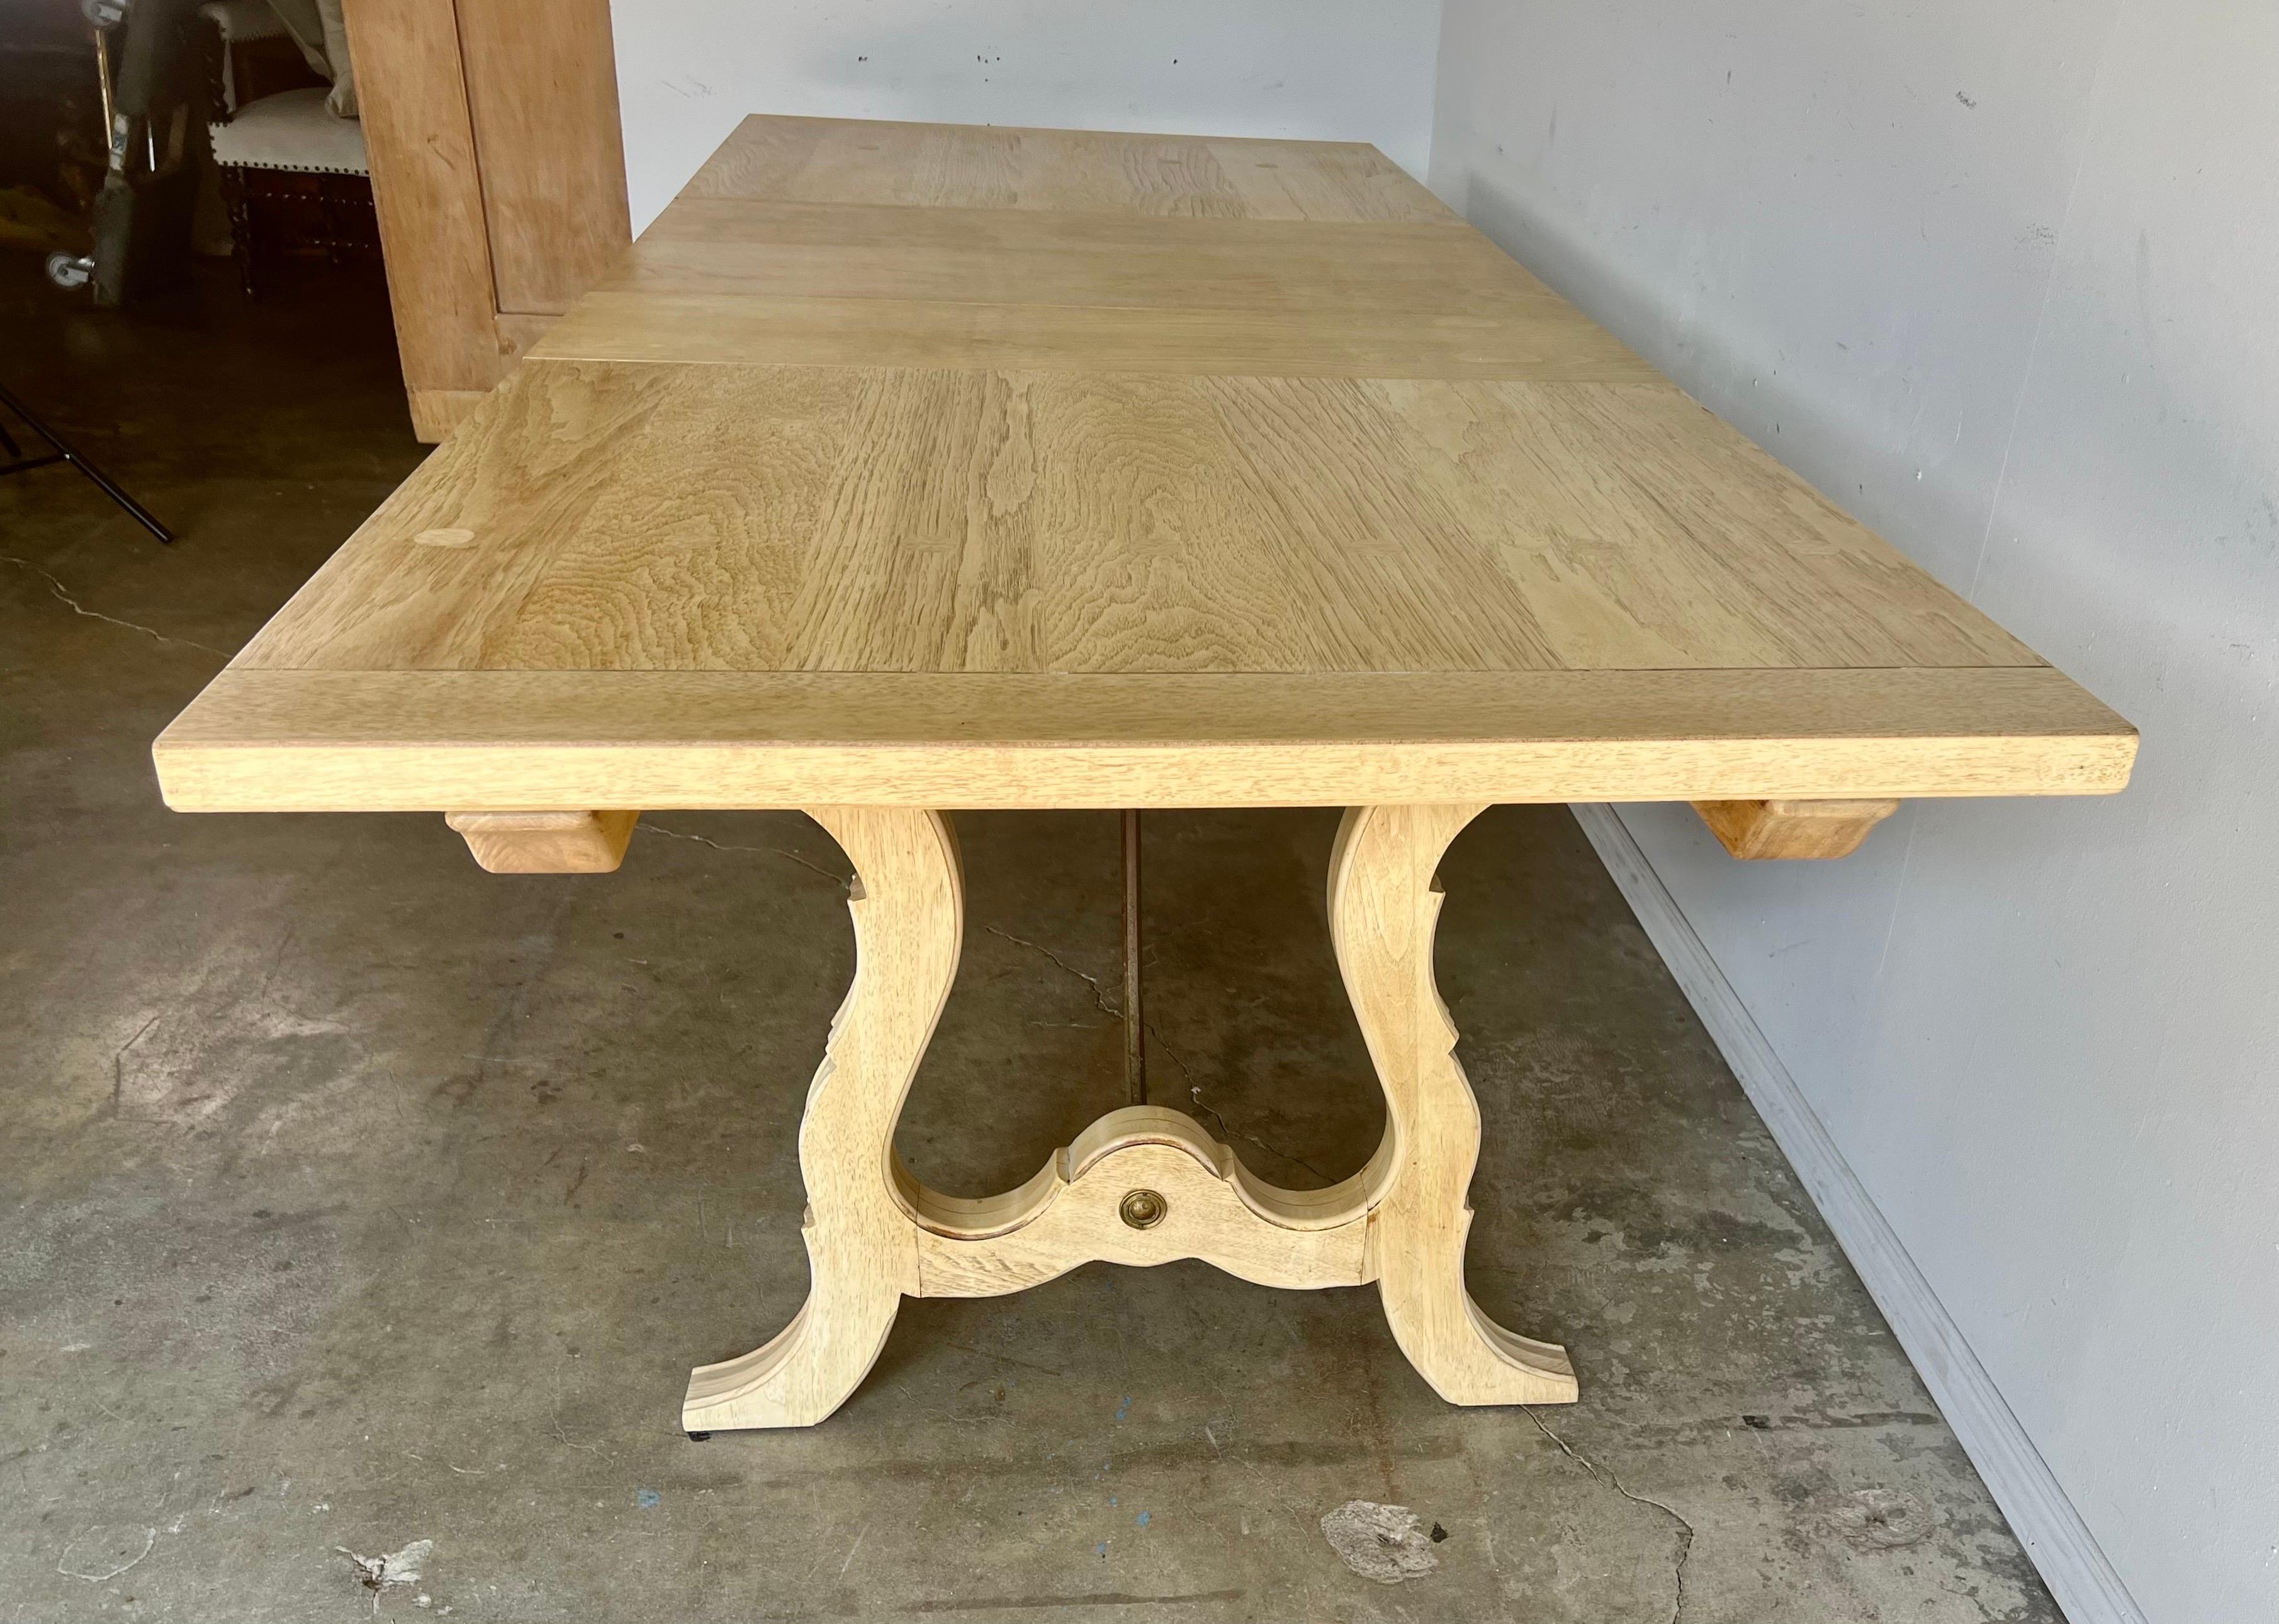 Italian bleached walnut refractory style dining table with two leaves. The table has an iron stretcher that connects both lyre-shaped sides of the table.